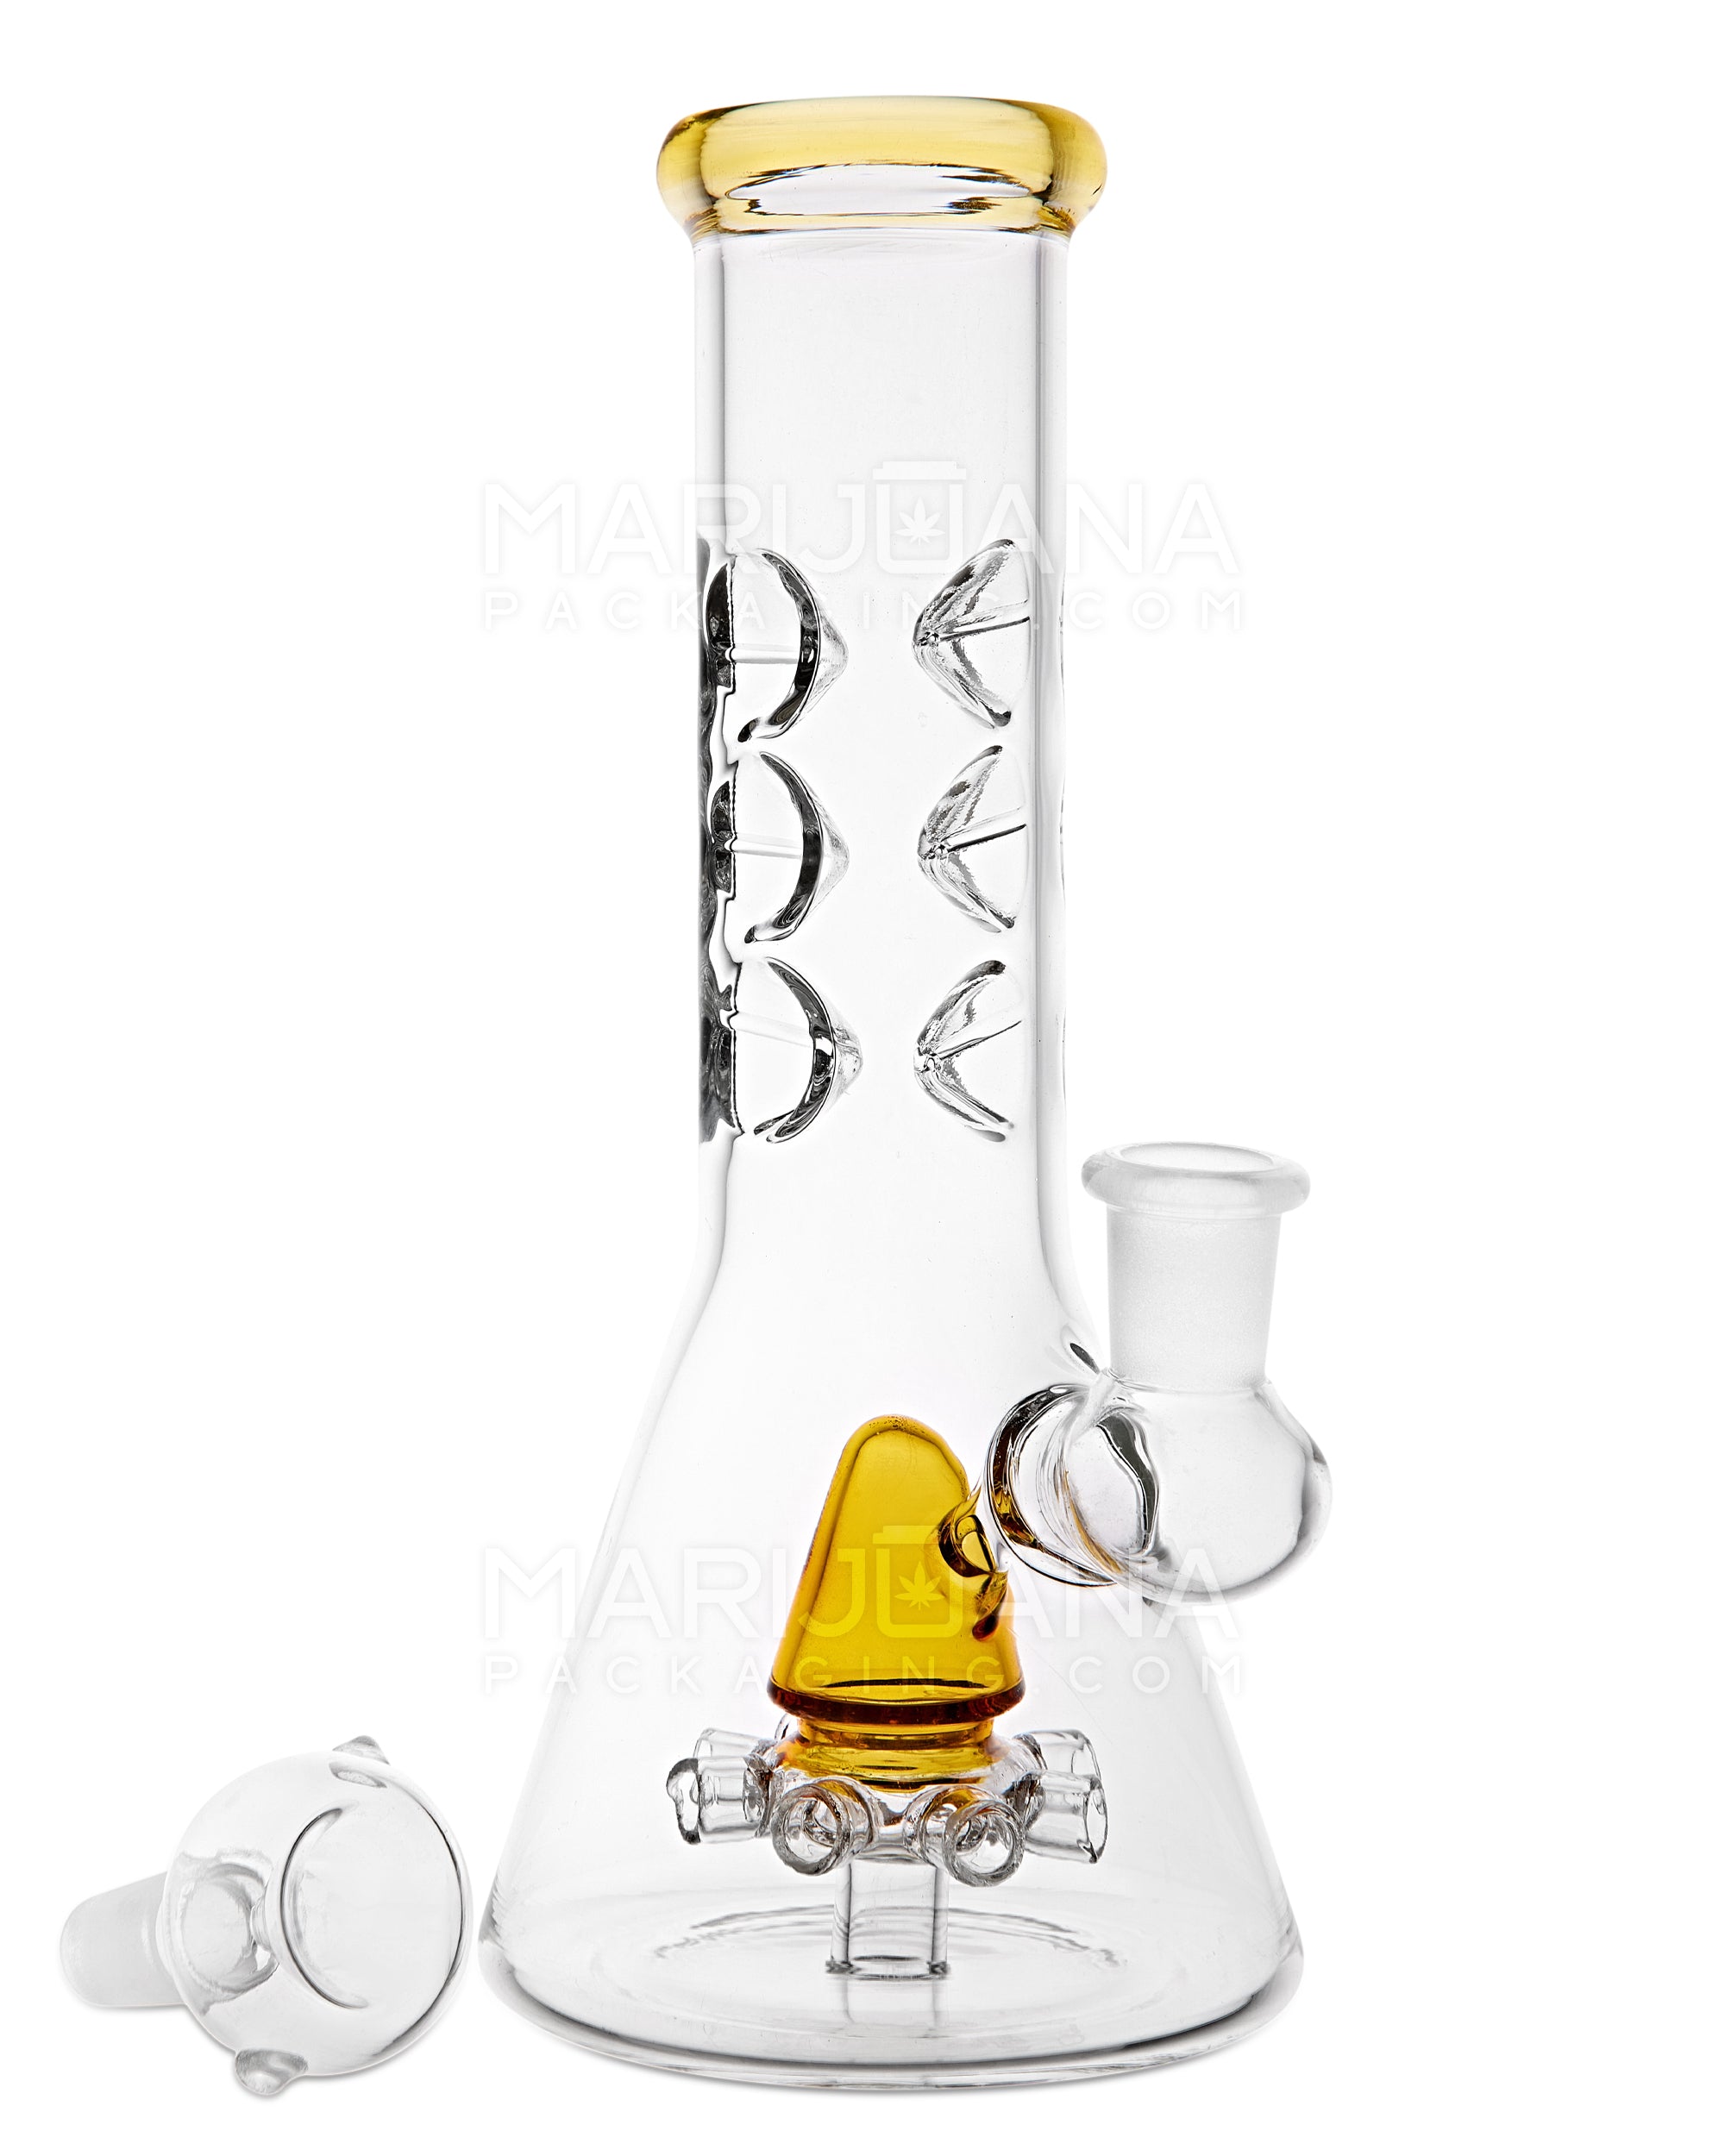 Straight Neck Atomic Perc Glass Beaker Water Pipe w/ Ice Catcher | 10in Tall - 14mm Bowl - Amber - 2